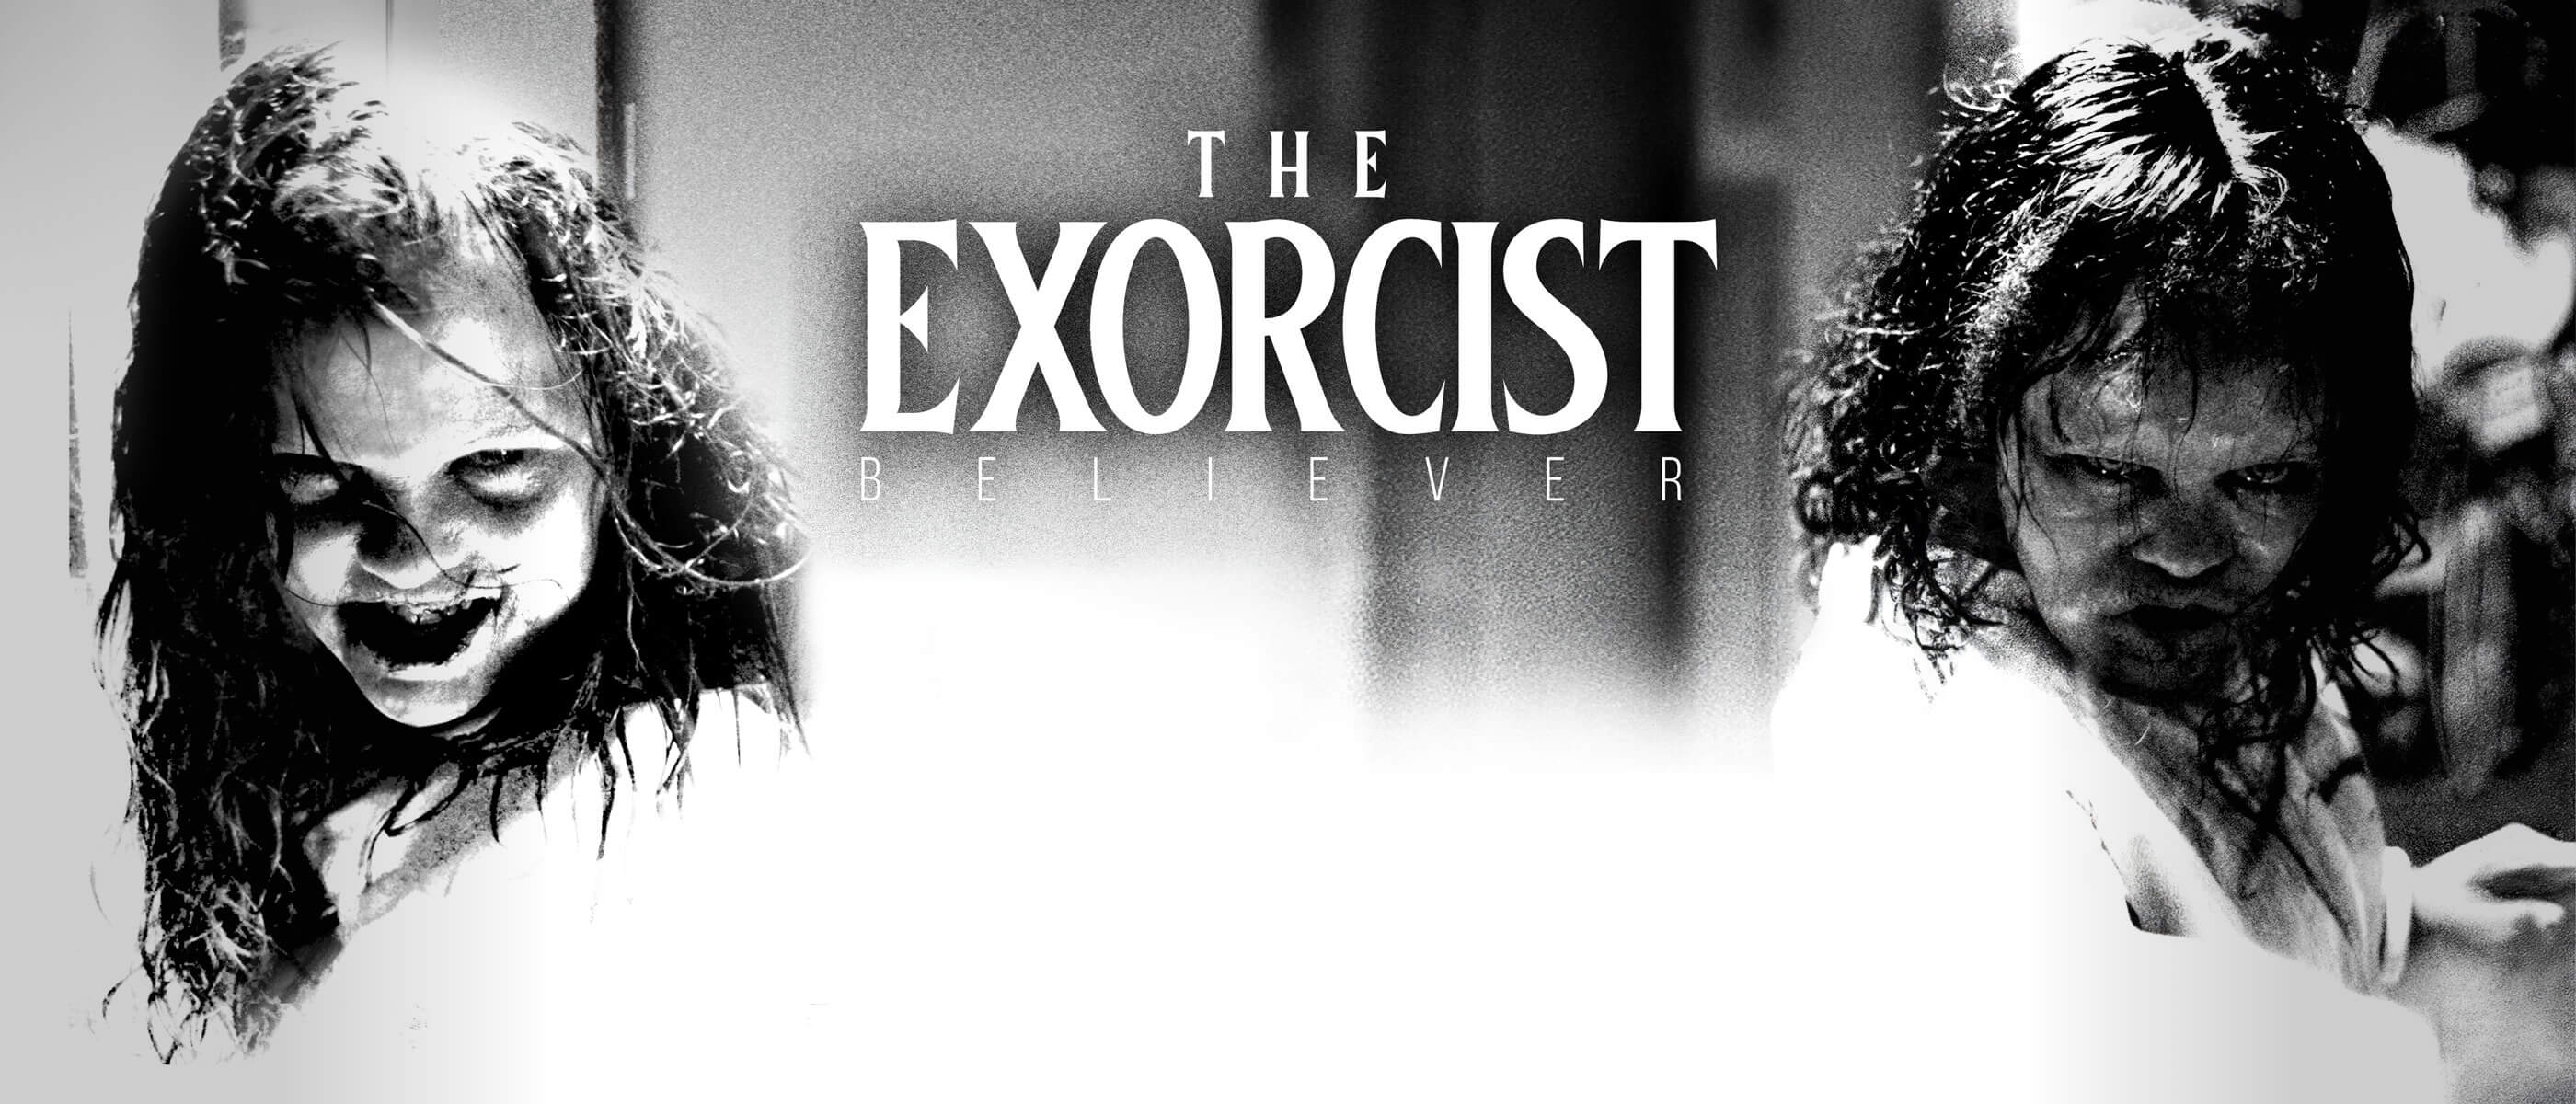 Black and white image of two possessed young girls staring with an evil look in their eyes with The Exorcist logo between them.